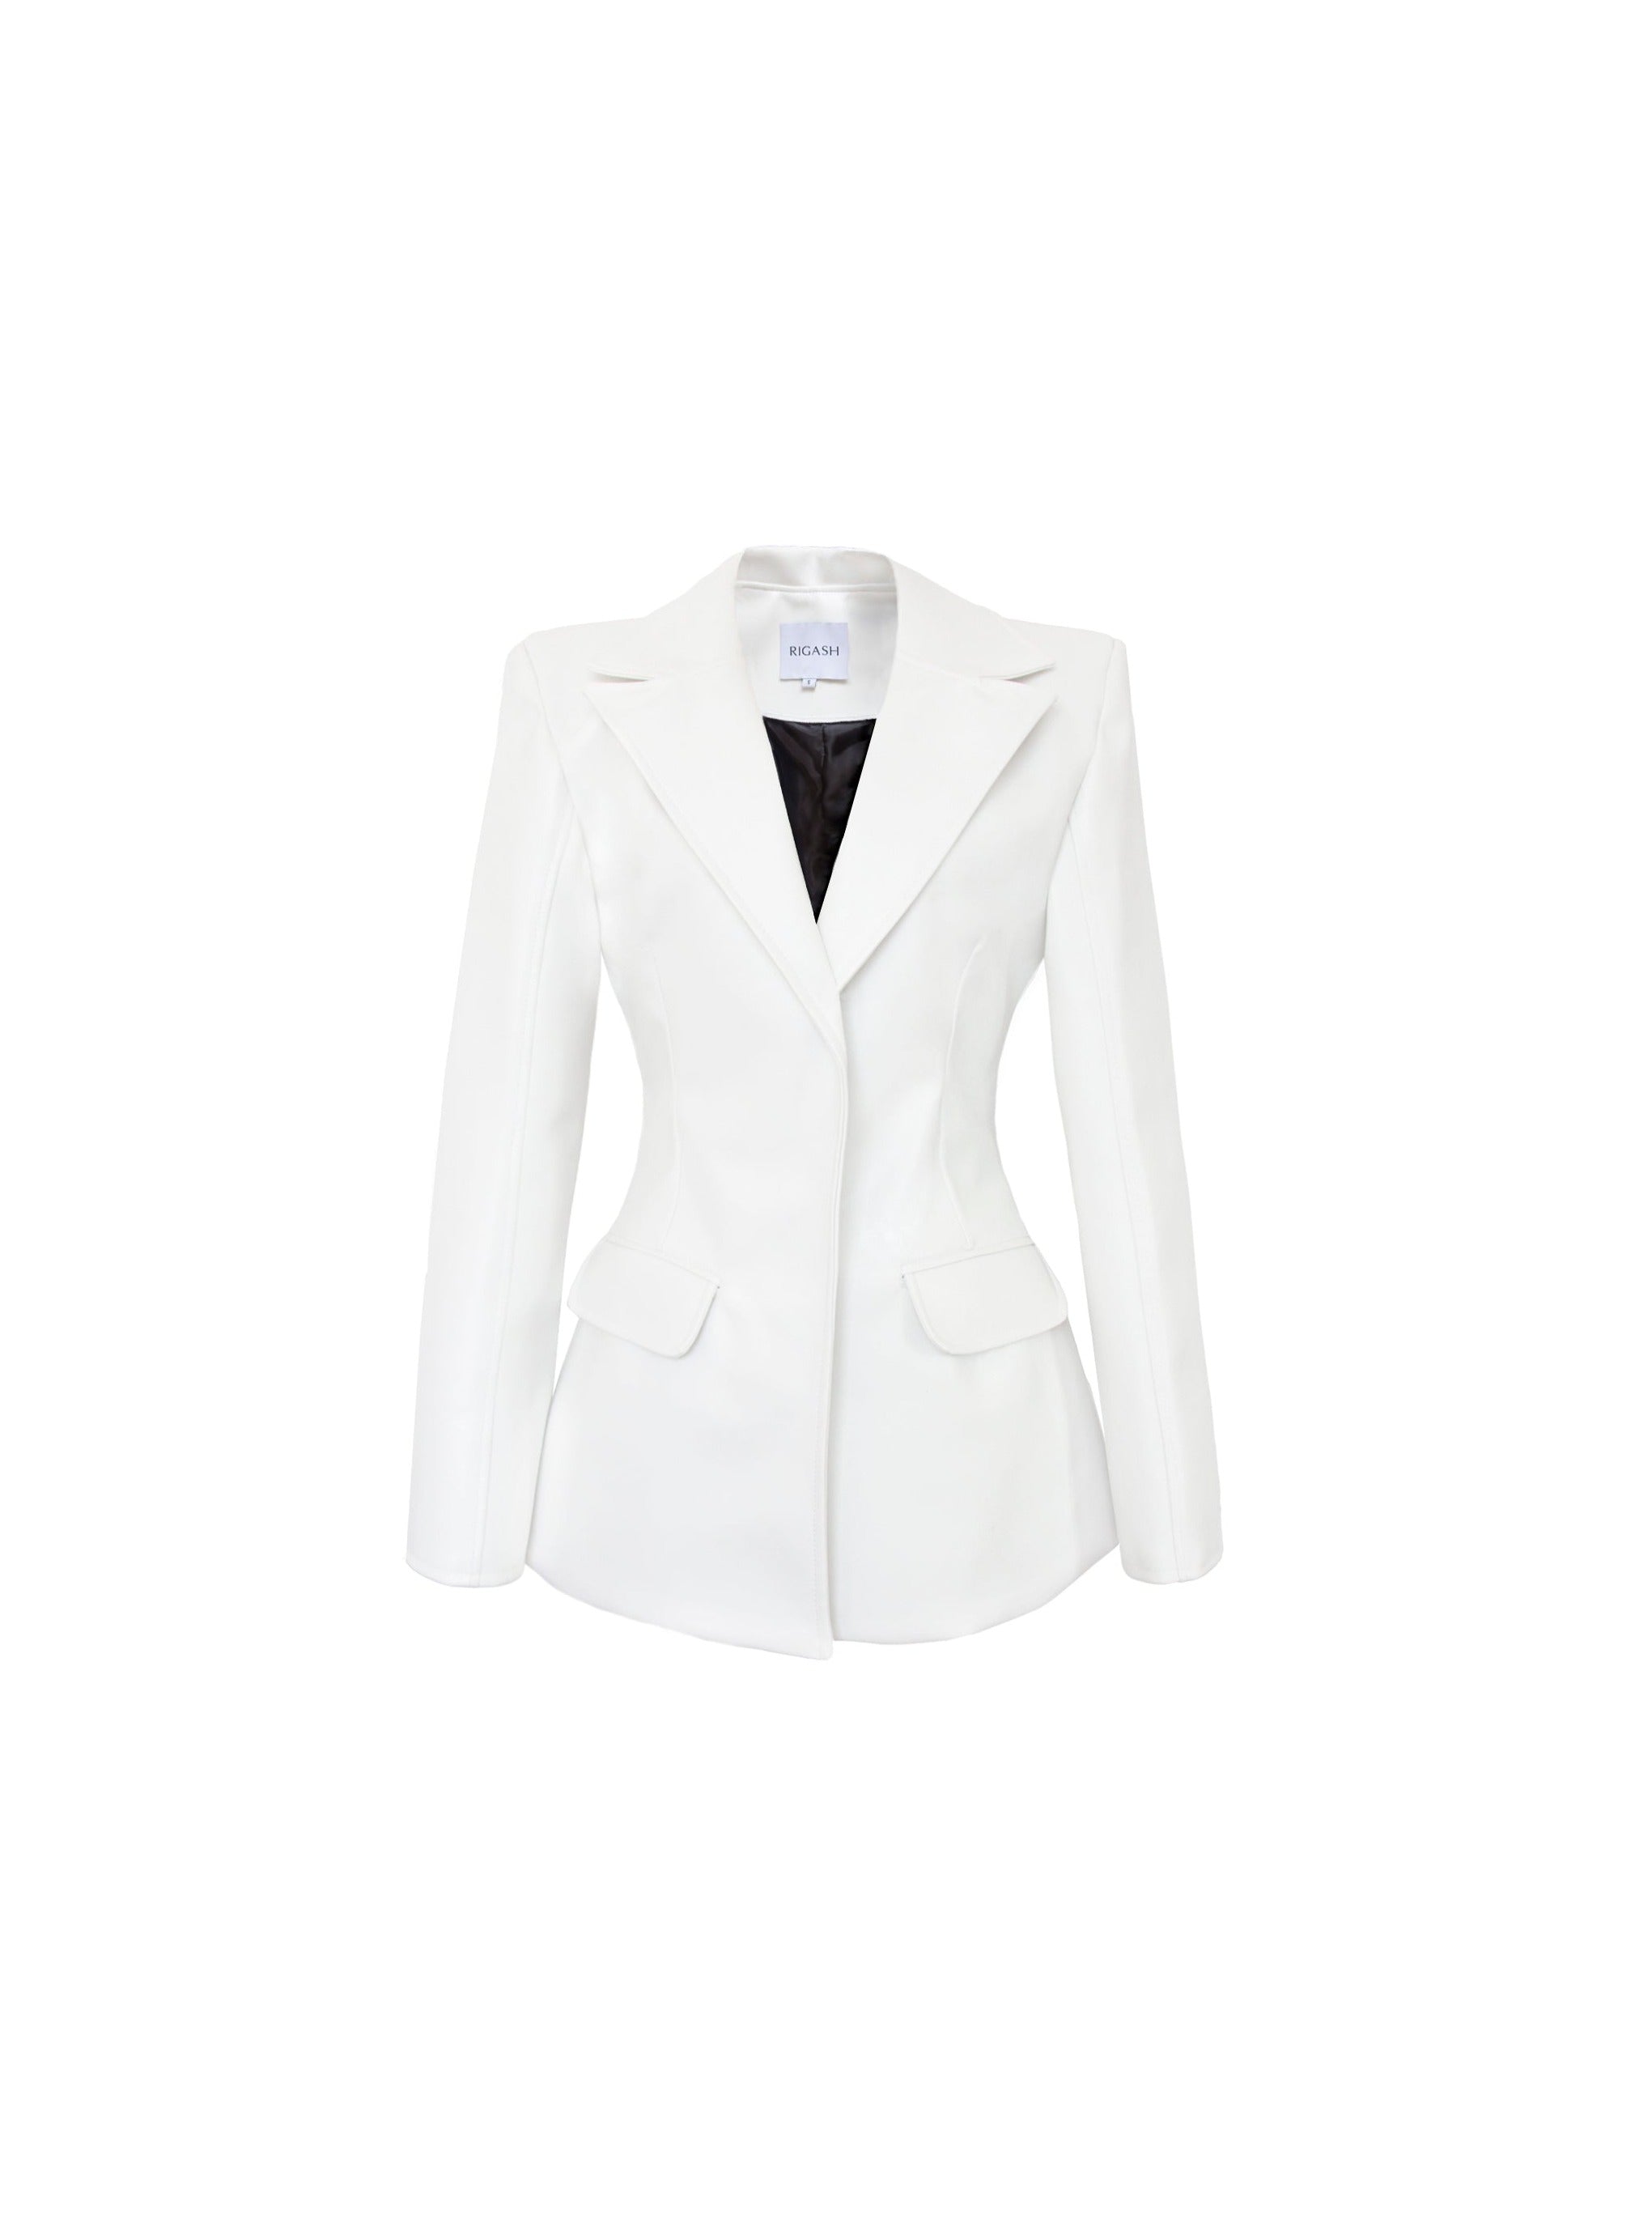 White fitted leather coat with exaggerated shoulders.